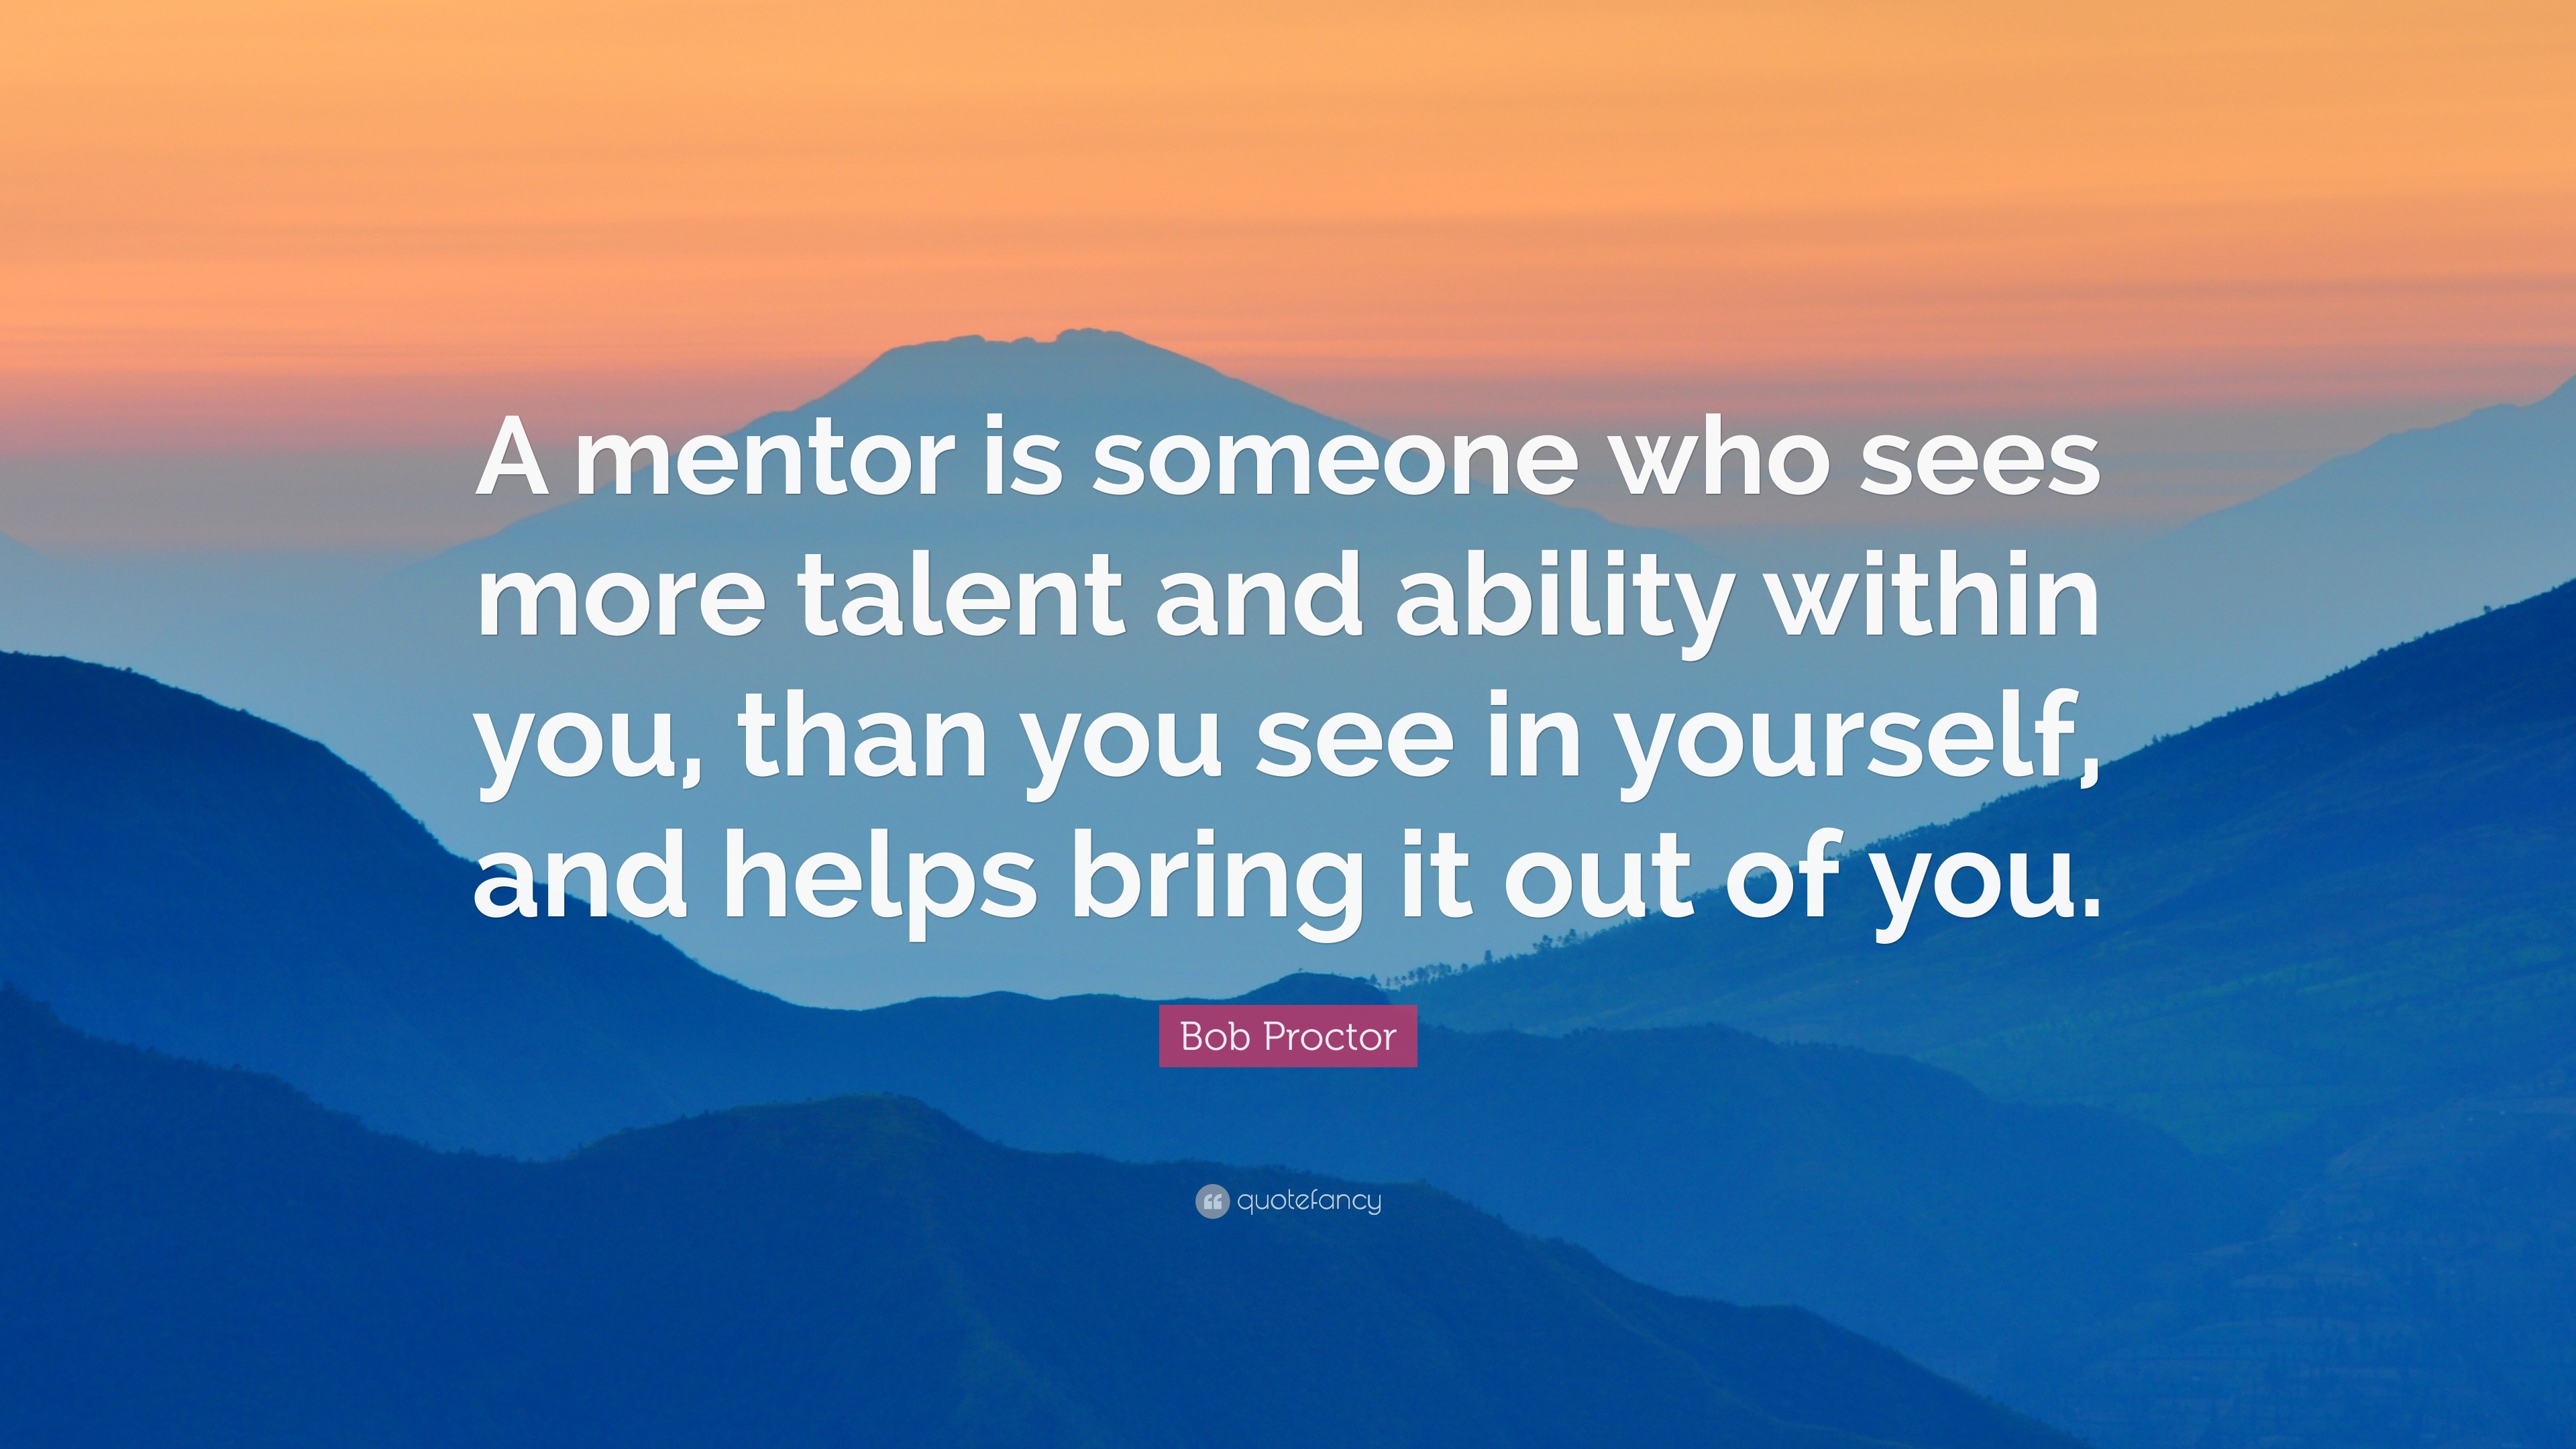 Bob Proctor Quote: “A mentor is someone sees more talent and ability within you, than you in yourself, and helps bring out you...”